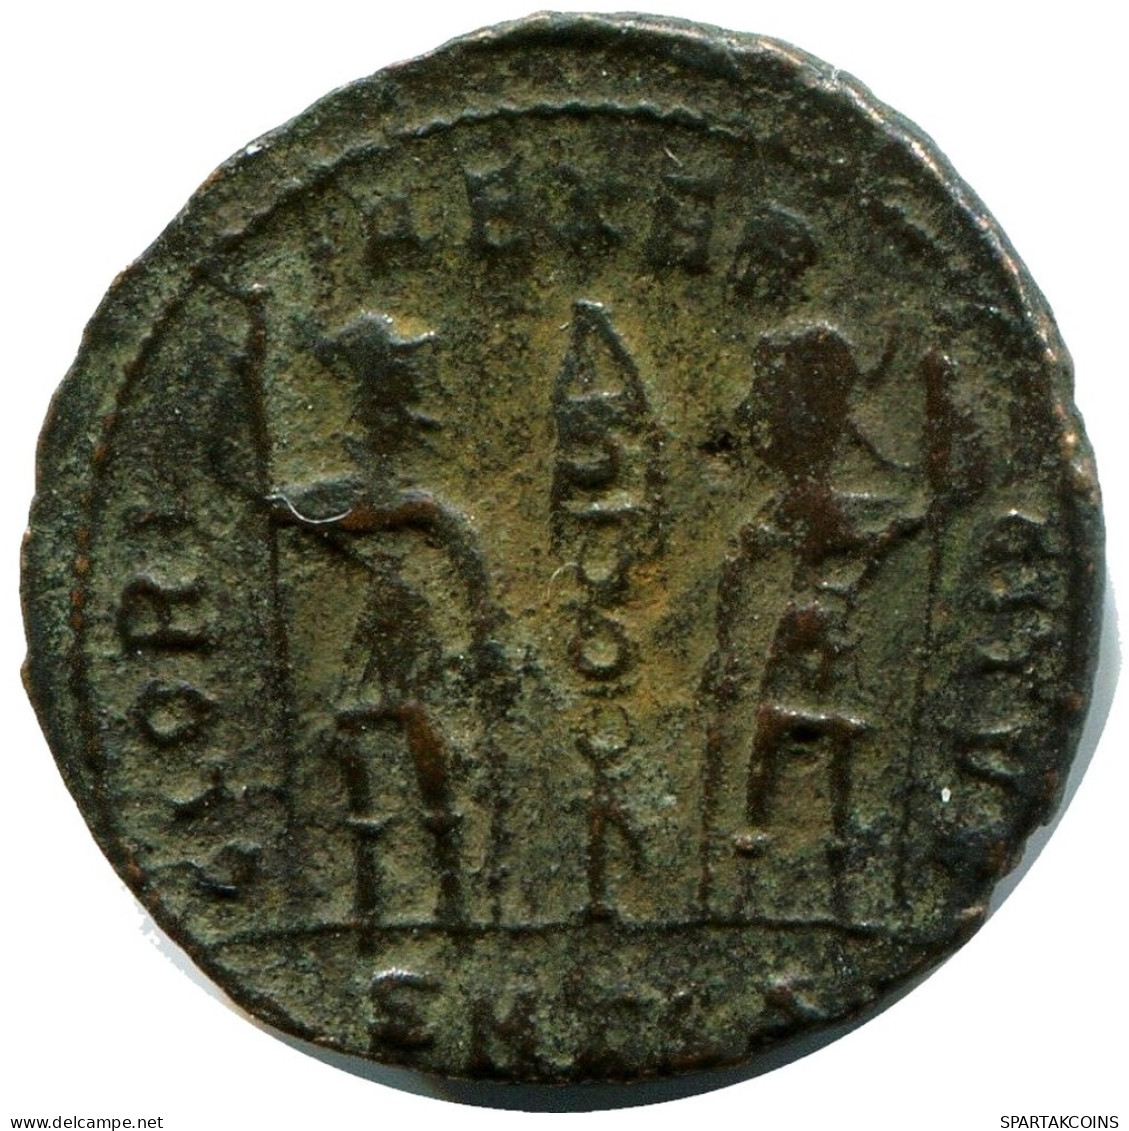 CONSTANS MINTED IN THESSALONICA FROM THE ROYAL ONTARIO MUSEUM #ANC11869.14.E.A - L'Empire Chrétien (307 à 363)